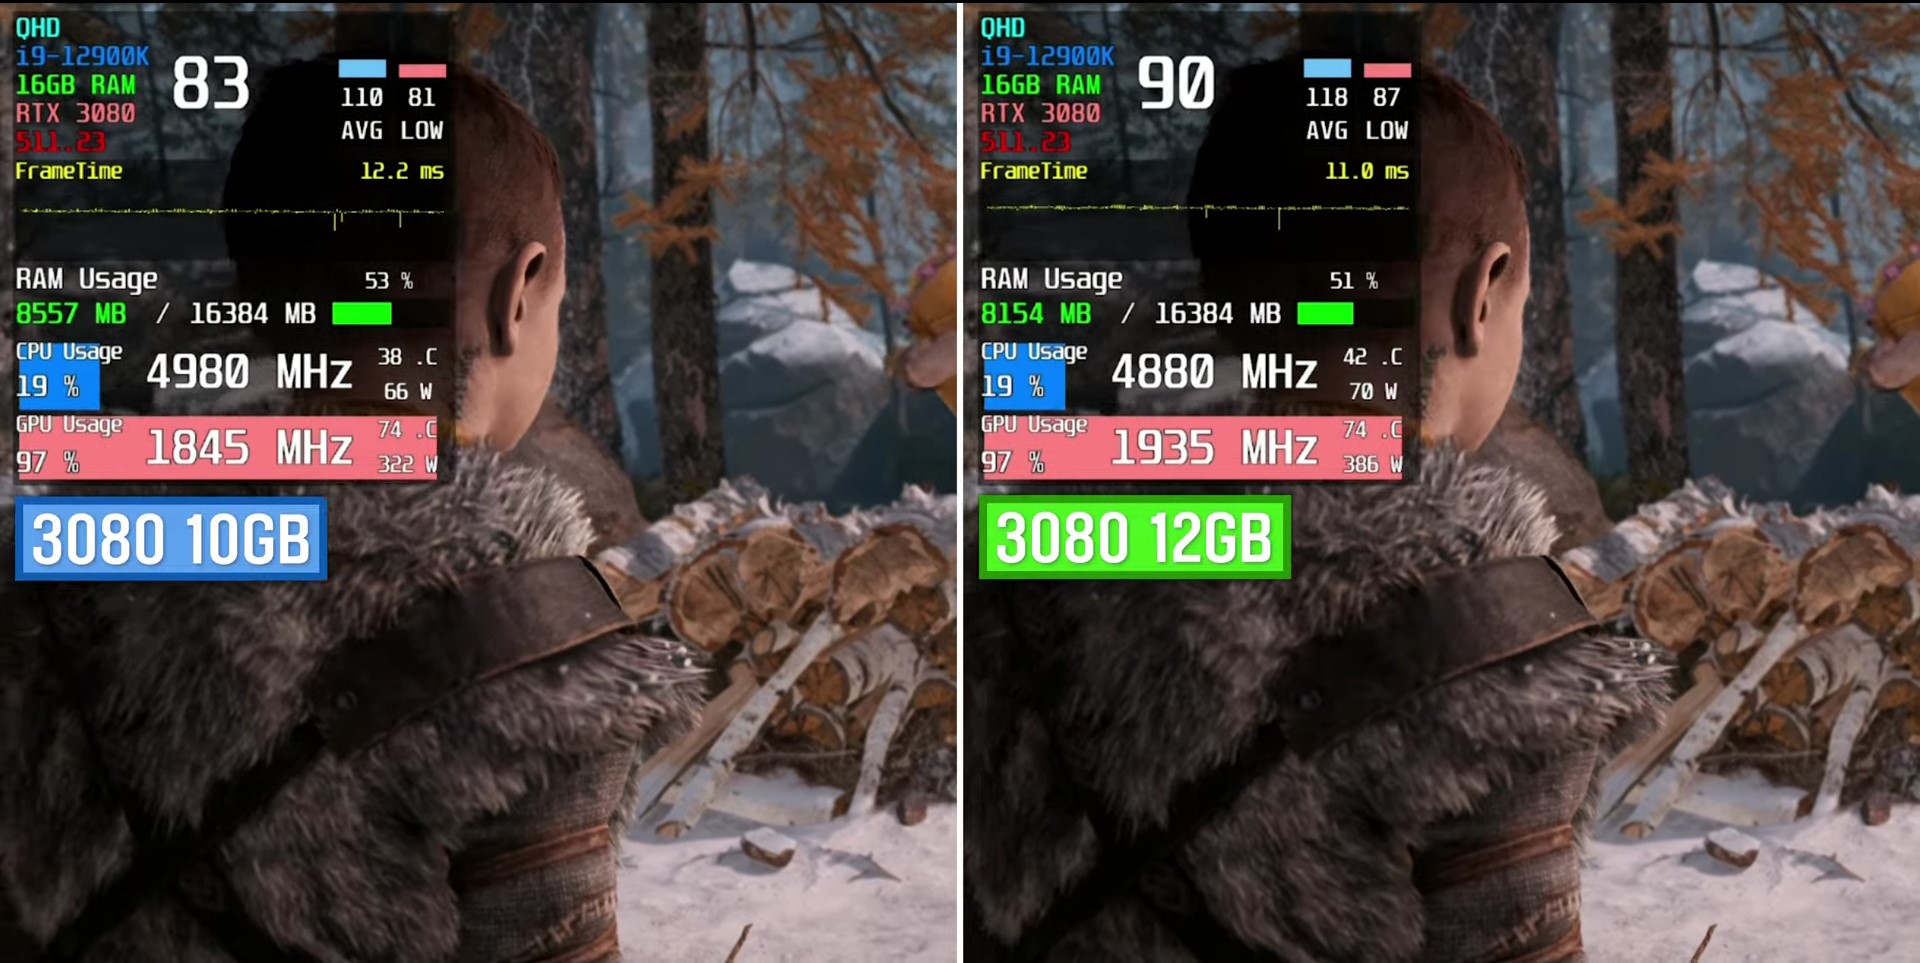 Benchmark Test of God Of War Ragnarök (GOW) on RTX 3080 10 GB and RTX 3080 12 GB at 1440p